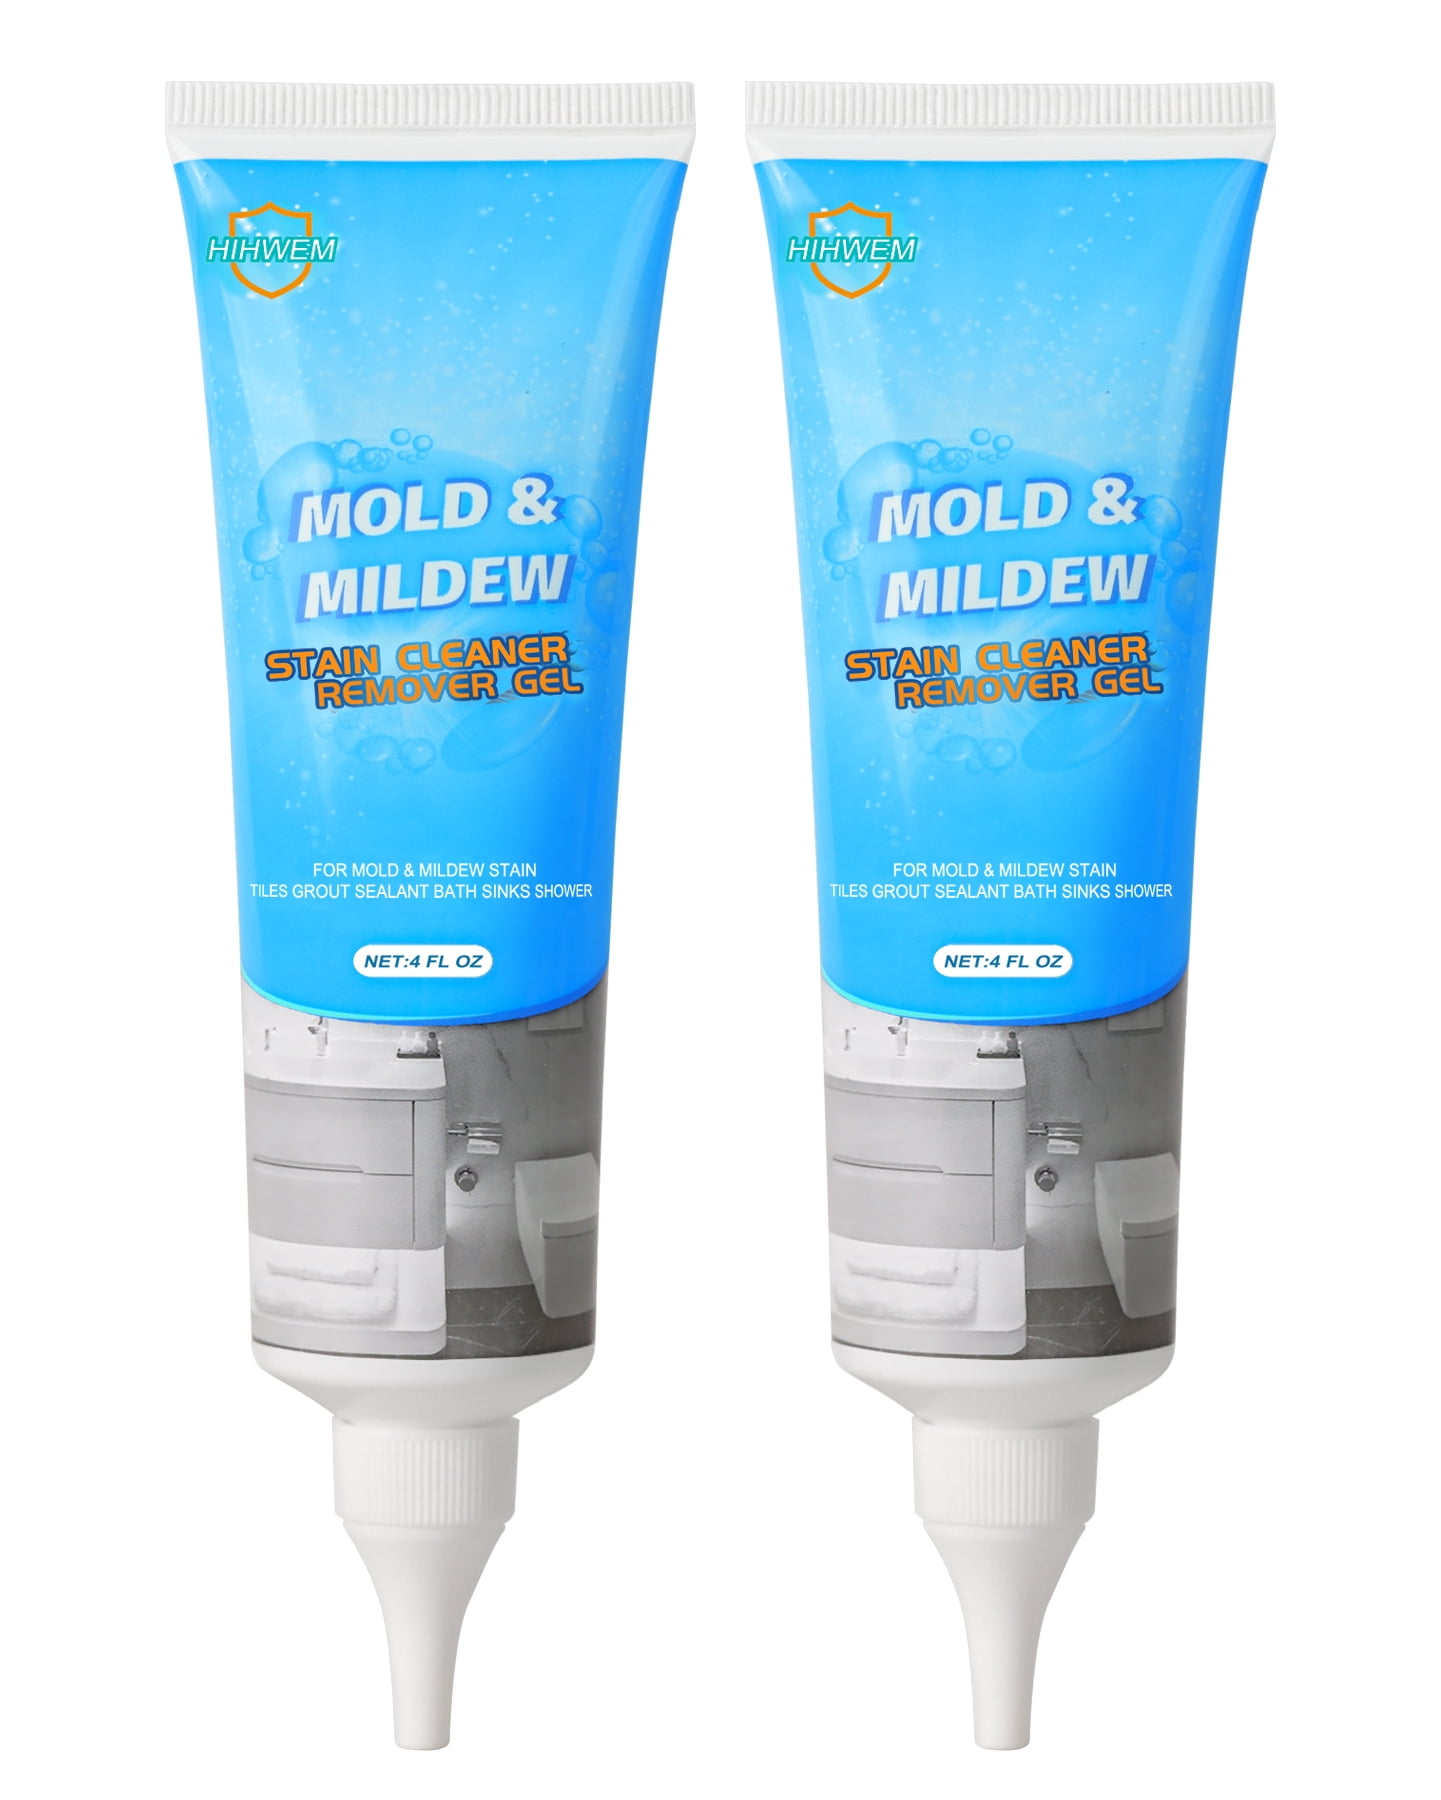 Mold Remover Gel, Household Mold Remover Gel, Cleaner Mold Remover